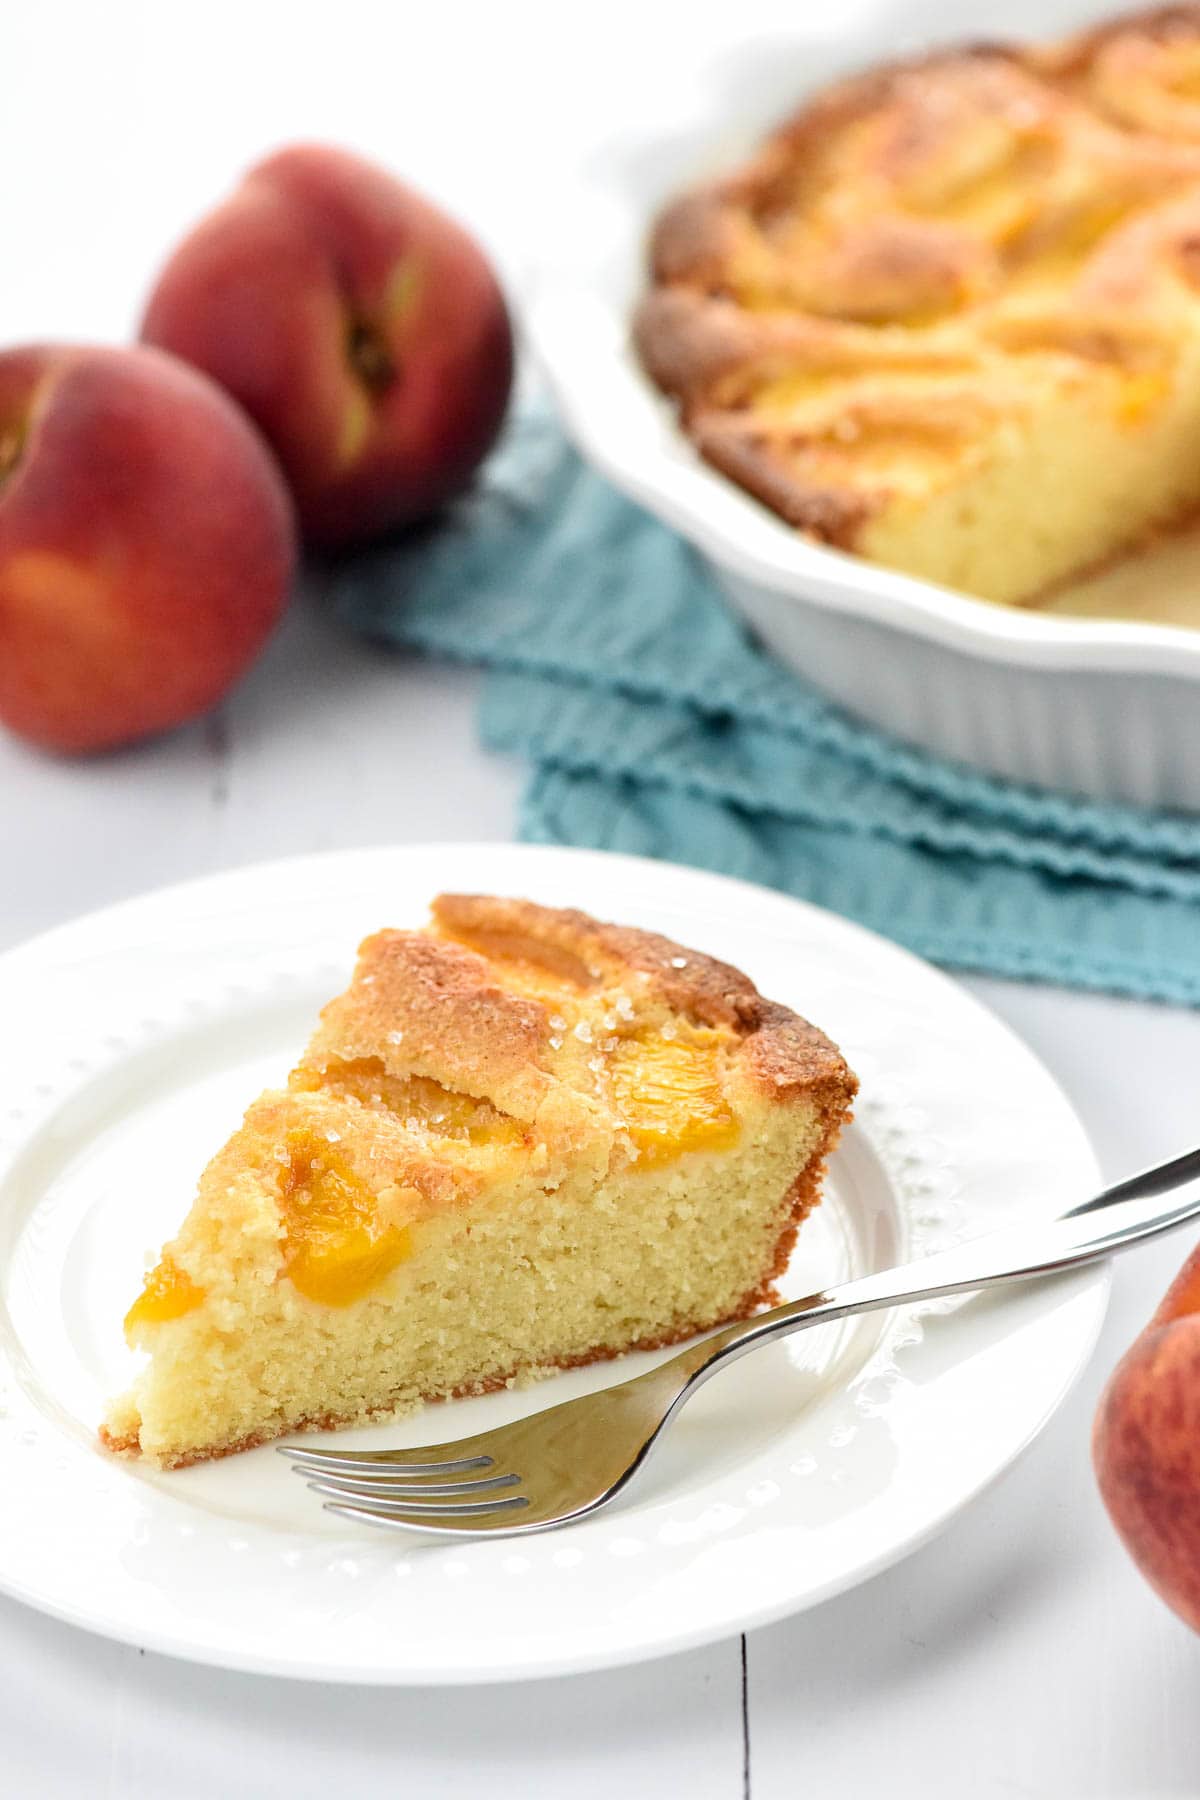 Peach Cake recipe on plate and in baking dish.